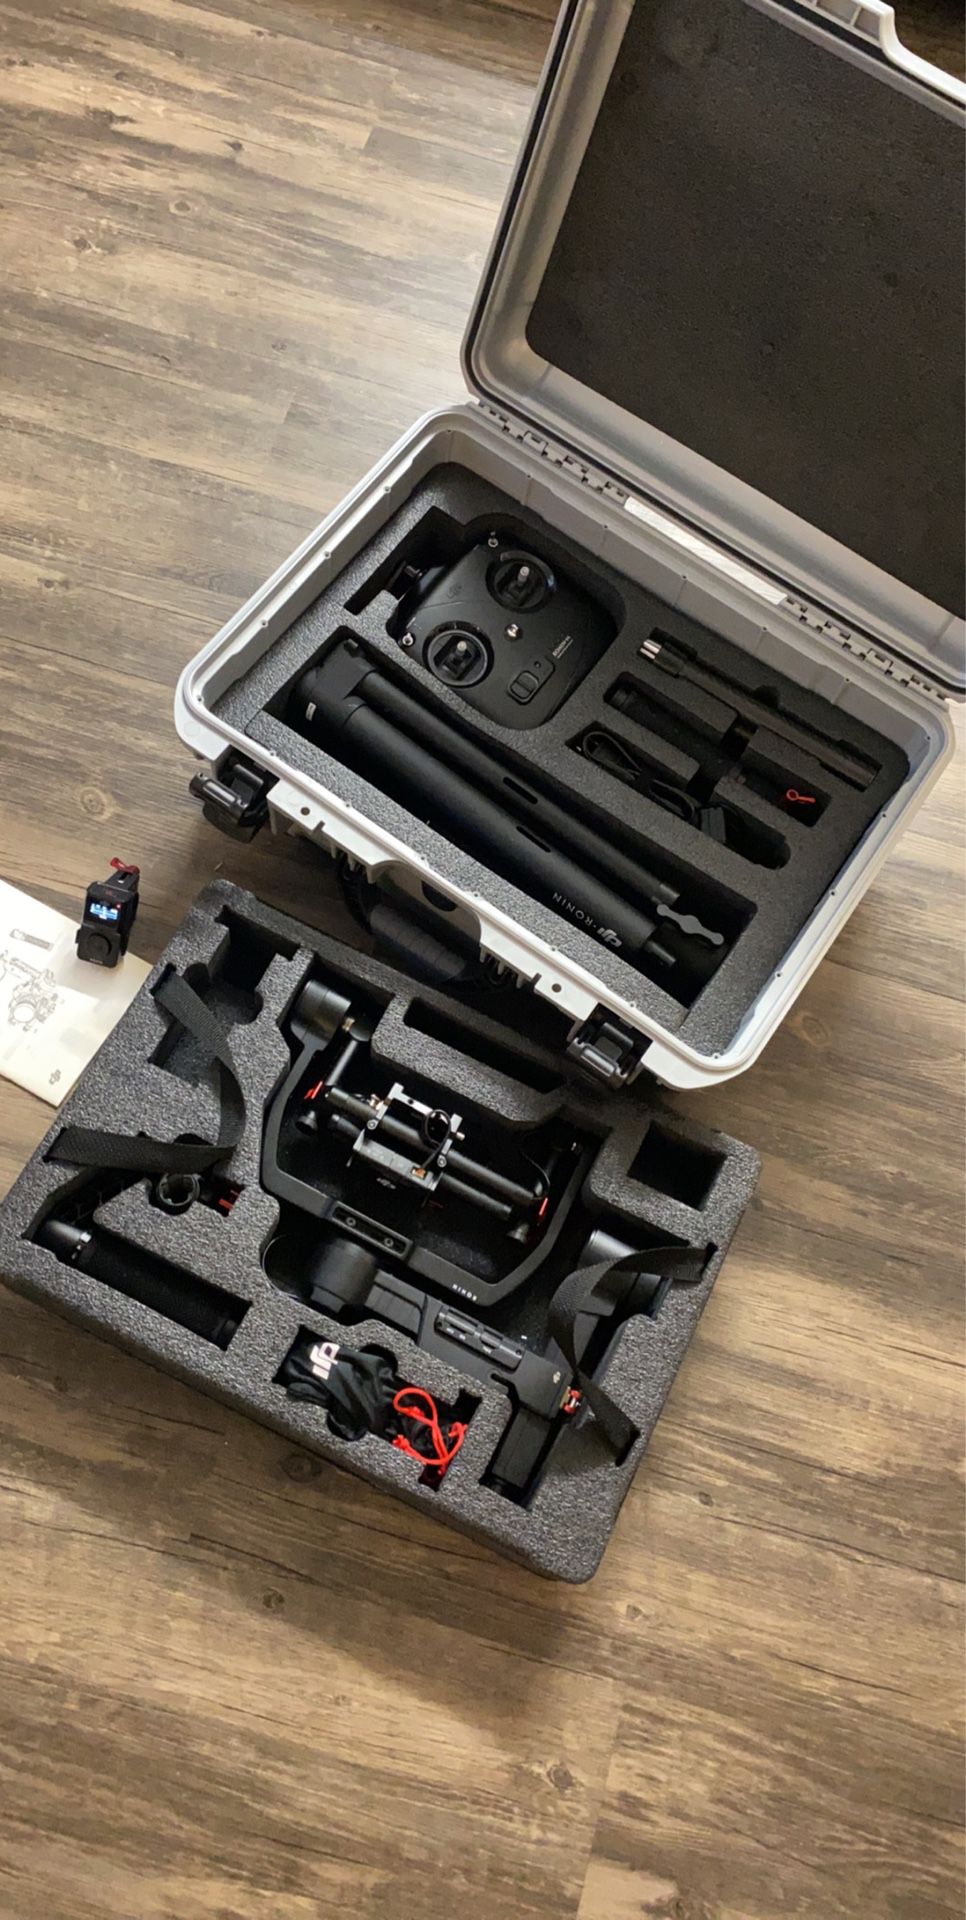 DJI Ronin m camera stabilizer(batteries not included)